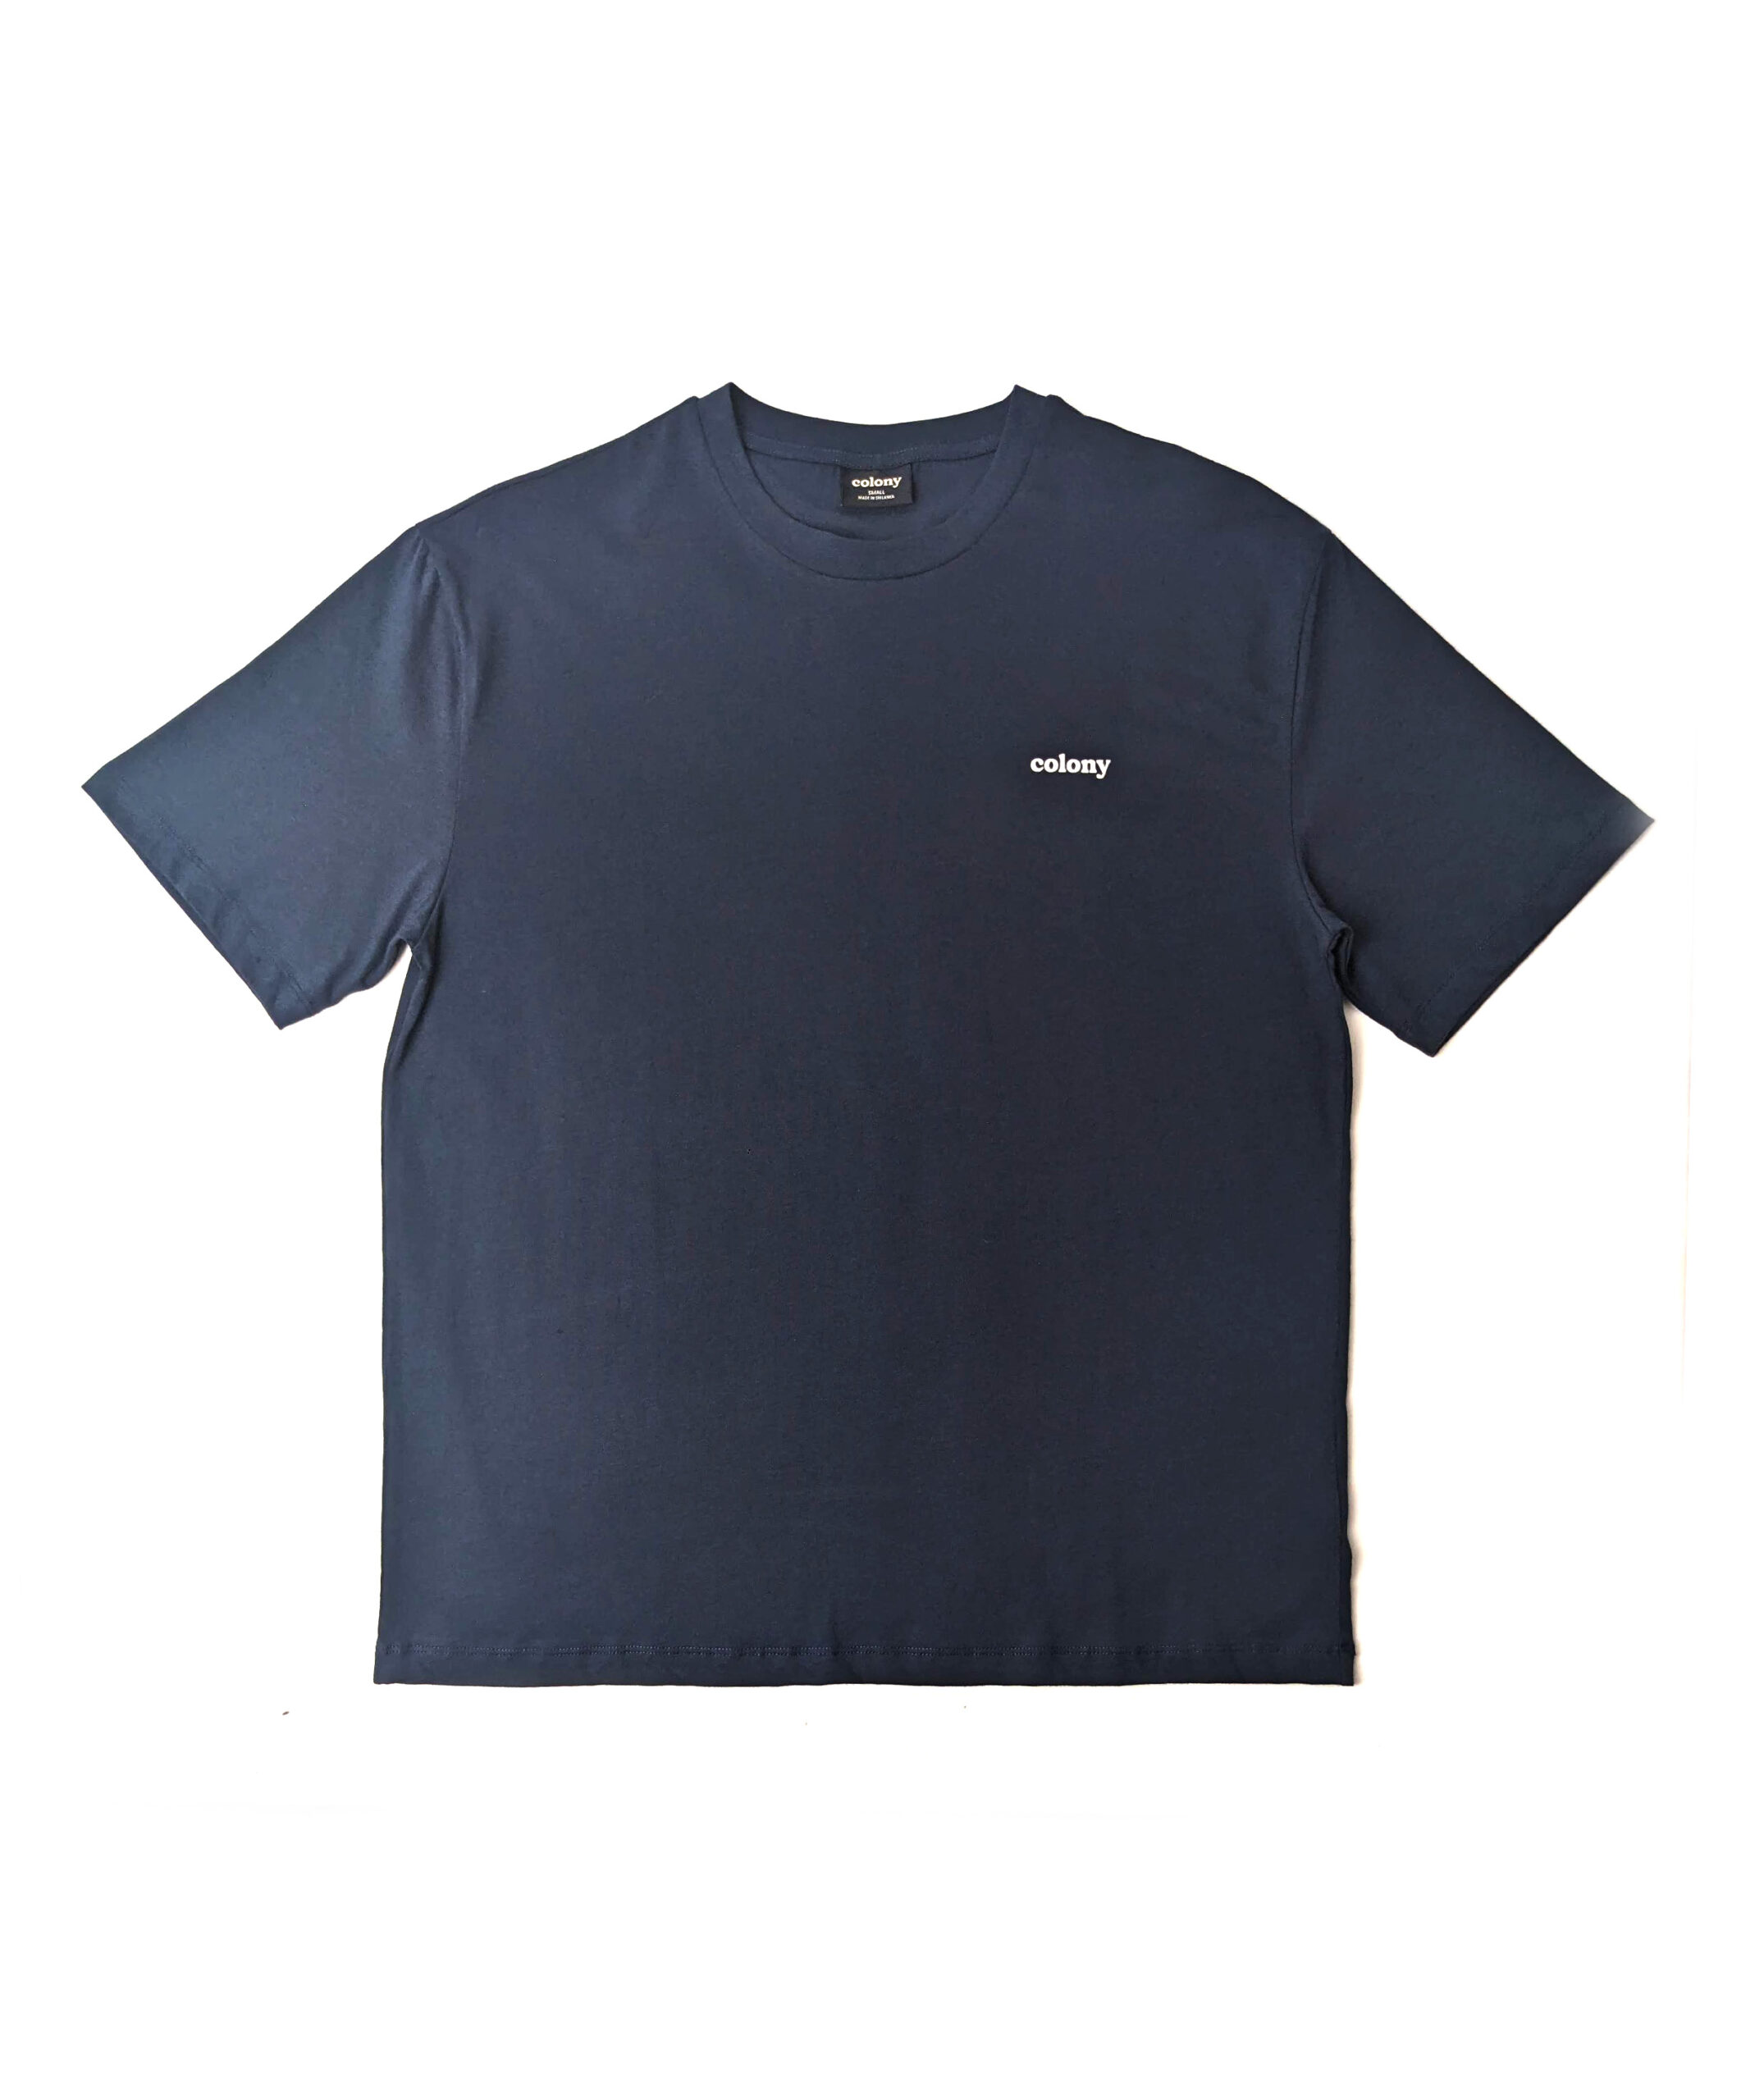 Oversized Graphic Tshirt - Classic Tee in Navy